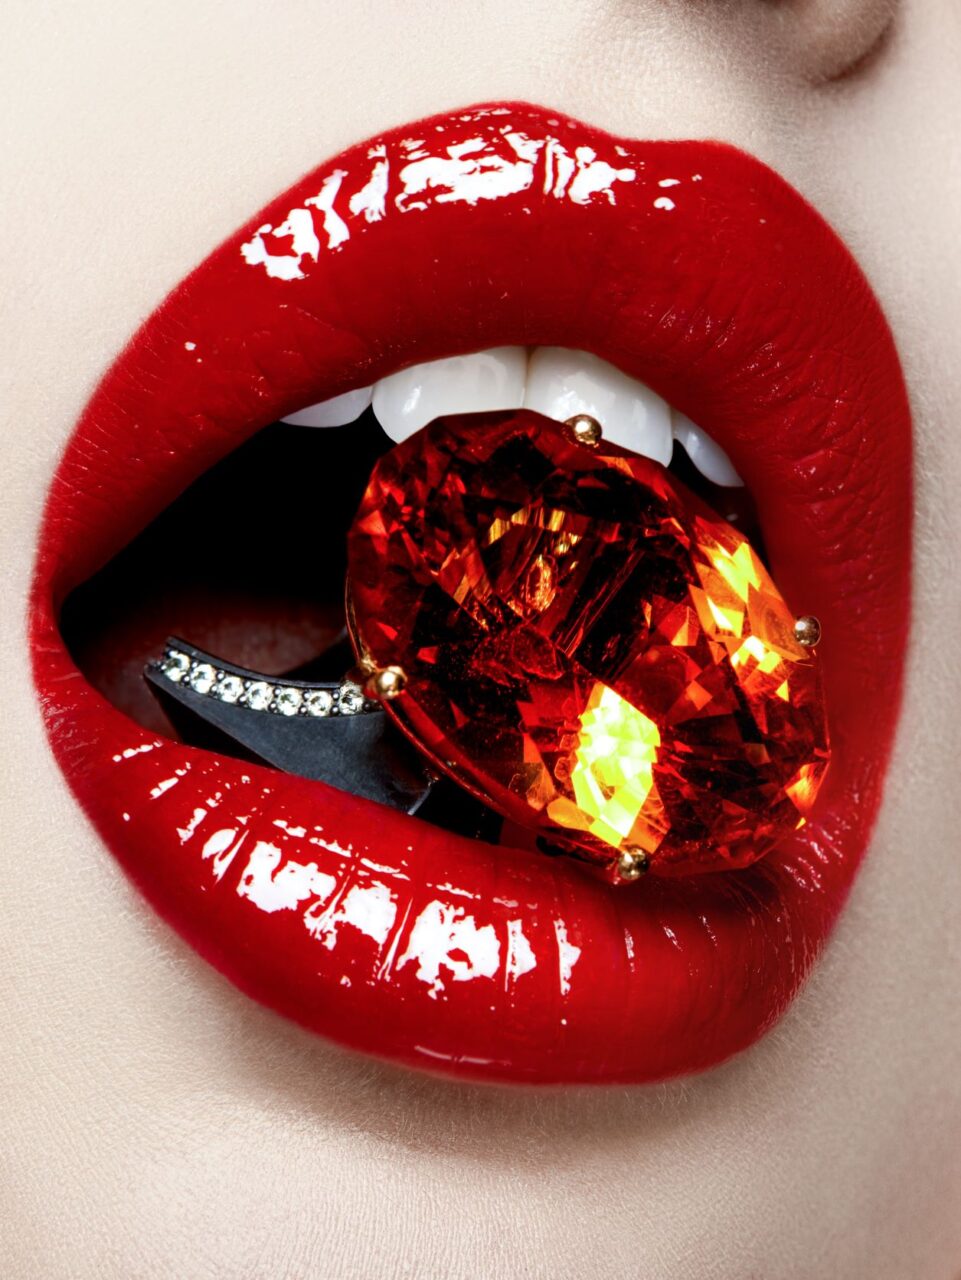 Close-up of a woman's mouth with red lipstick, holding a precious gem between her teeth